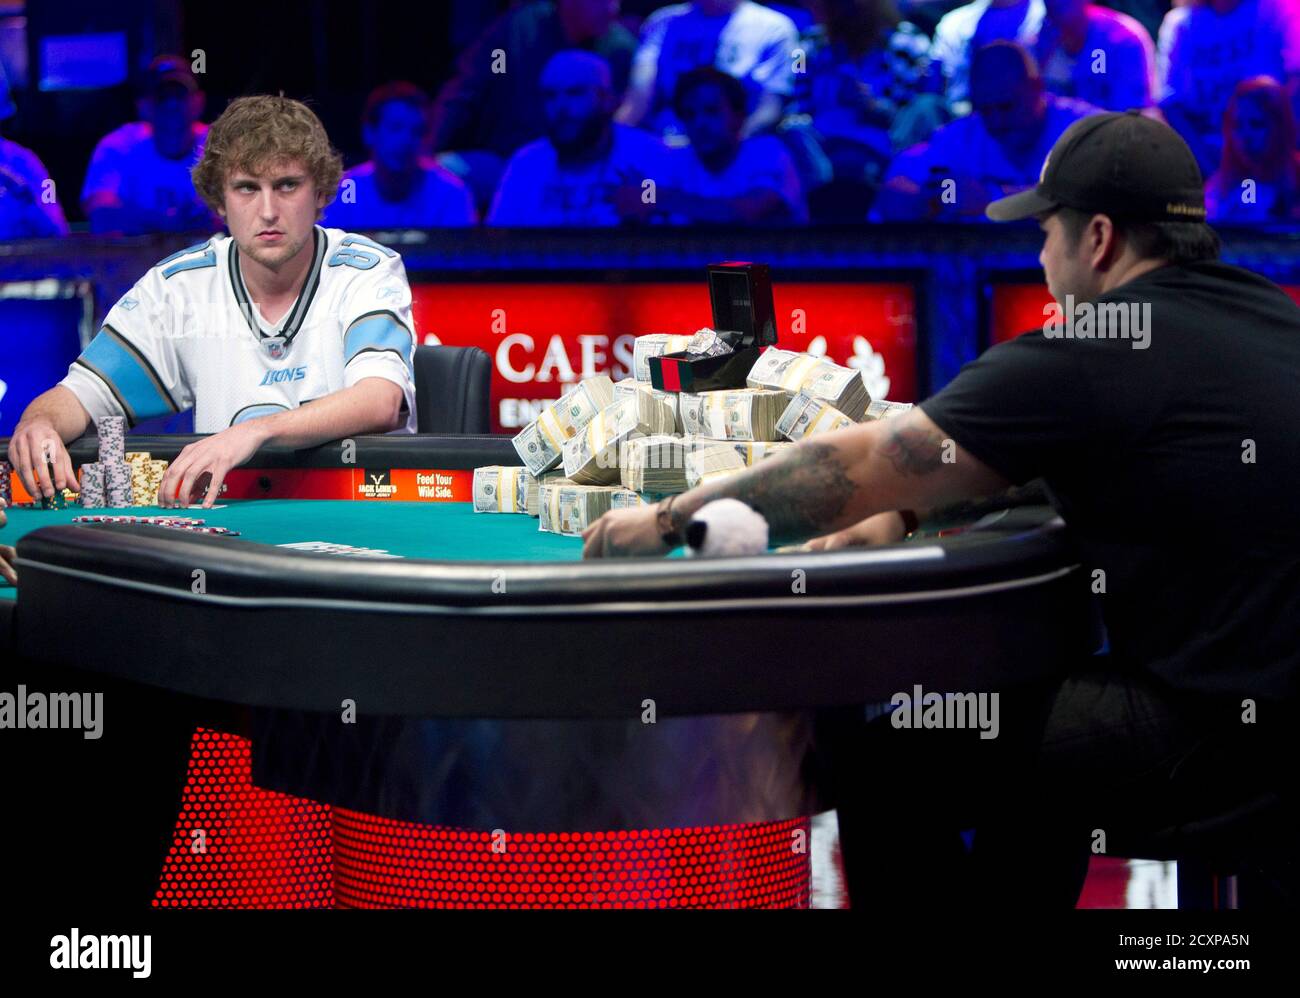 Ryan Riess (L), 23, a poker professional from East Lansing, Michigan contemplates a move against Jay Farber, 29, a Las Vegas VIP Host originally from Santa Barbara, California, during the final table of the World Series of Poker $10,000 buy-in no-limit Texas Hold 'Em tournament at the Rio Hotel & Casino in Las Vegas, Nevada November 5, 2013. REUTERS/Steve Marcus (UNITED STATES - Tags: SOCIETY TPX IMAGES OF THE DAY) Stock Photo